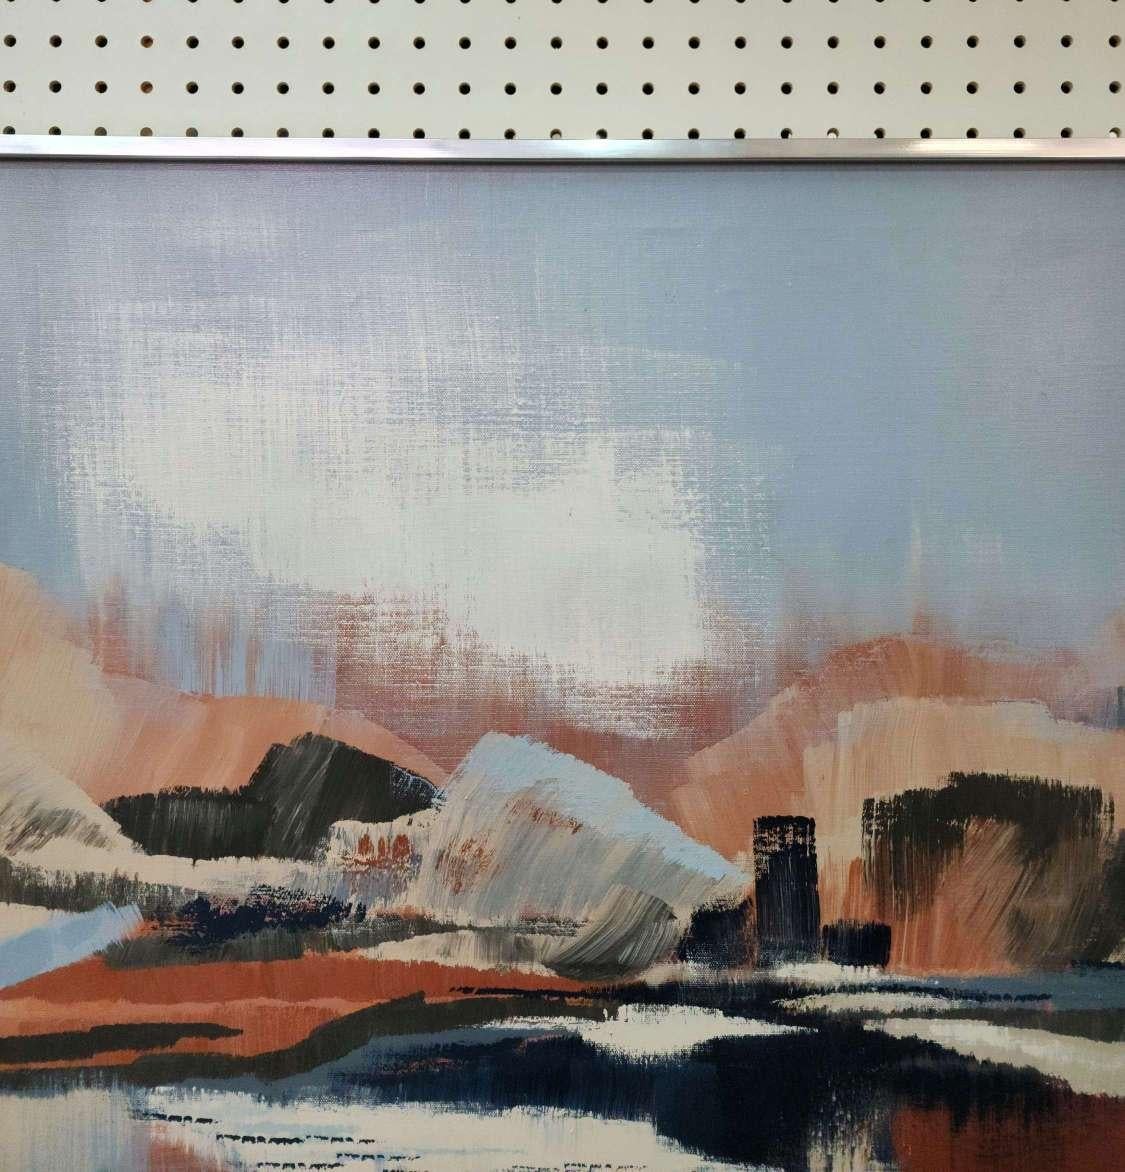 Large Abstract Landscape Painting by Lee Reynolds with Blues, Oranges, Pastels 8